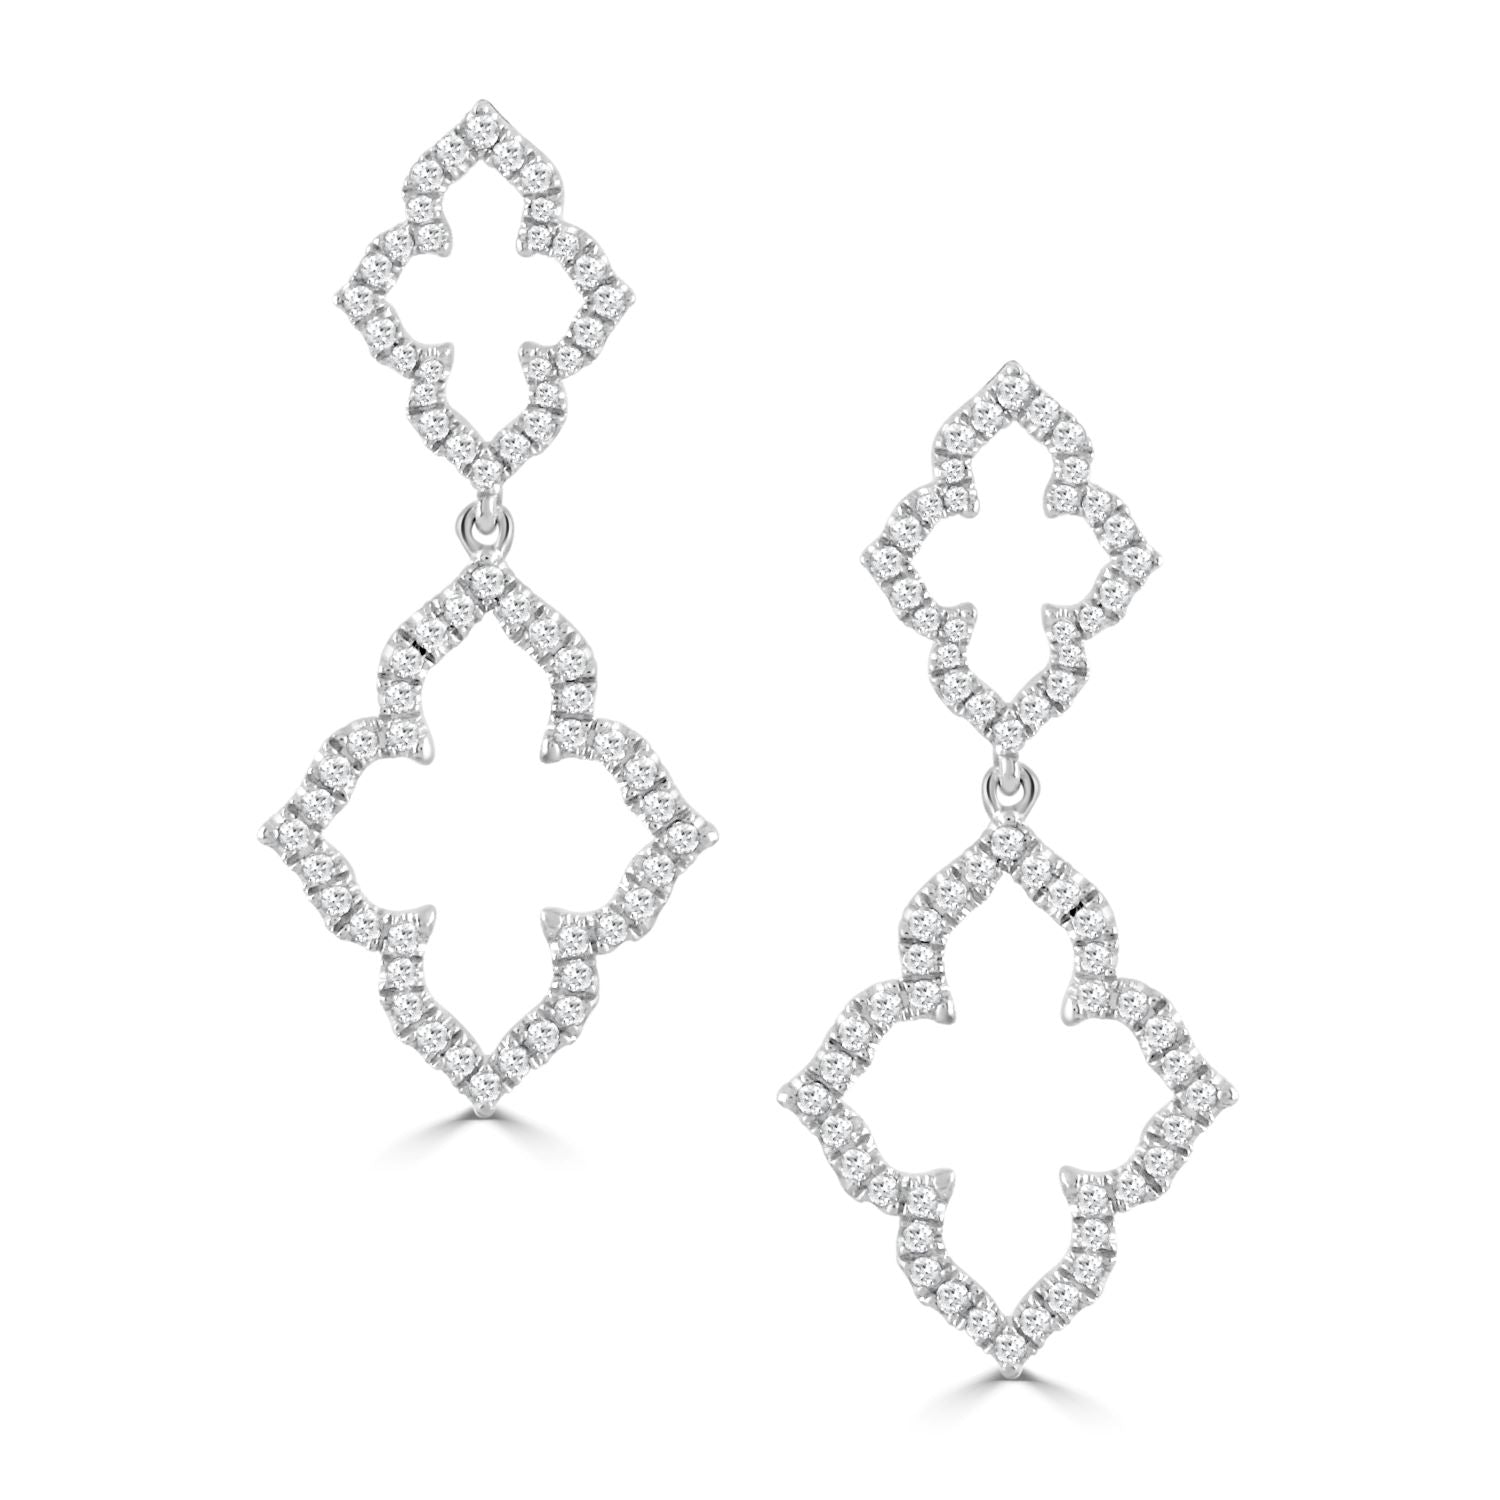 18K YELLOW GOLD DIAMOND EARRING (WHITE GOLD VERSION PICTURED)